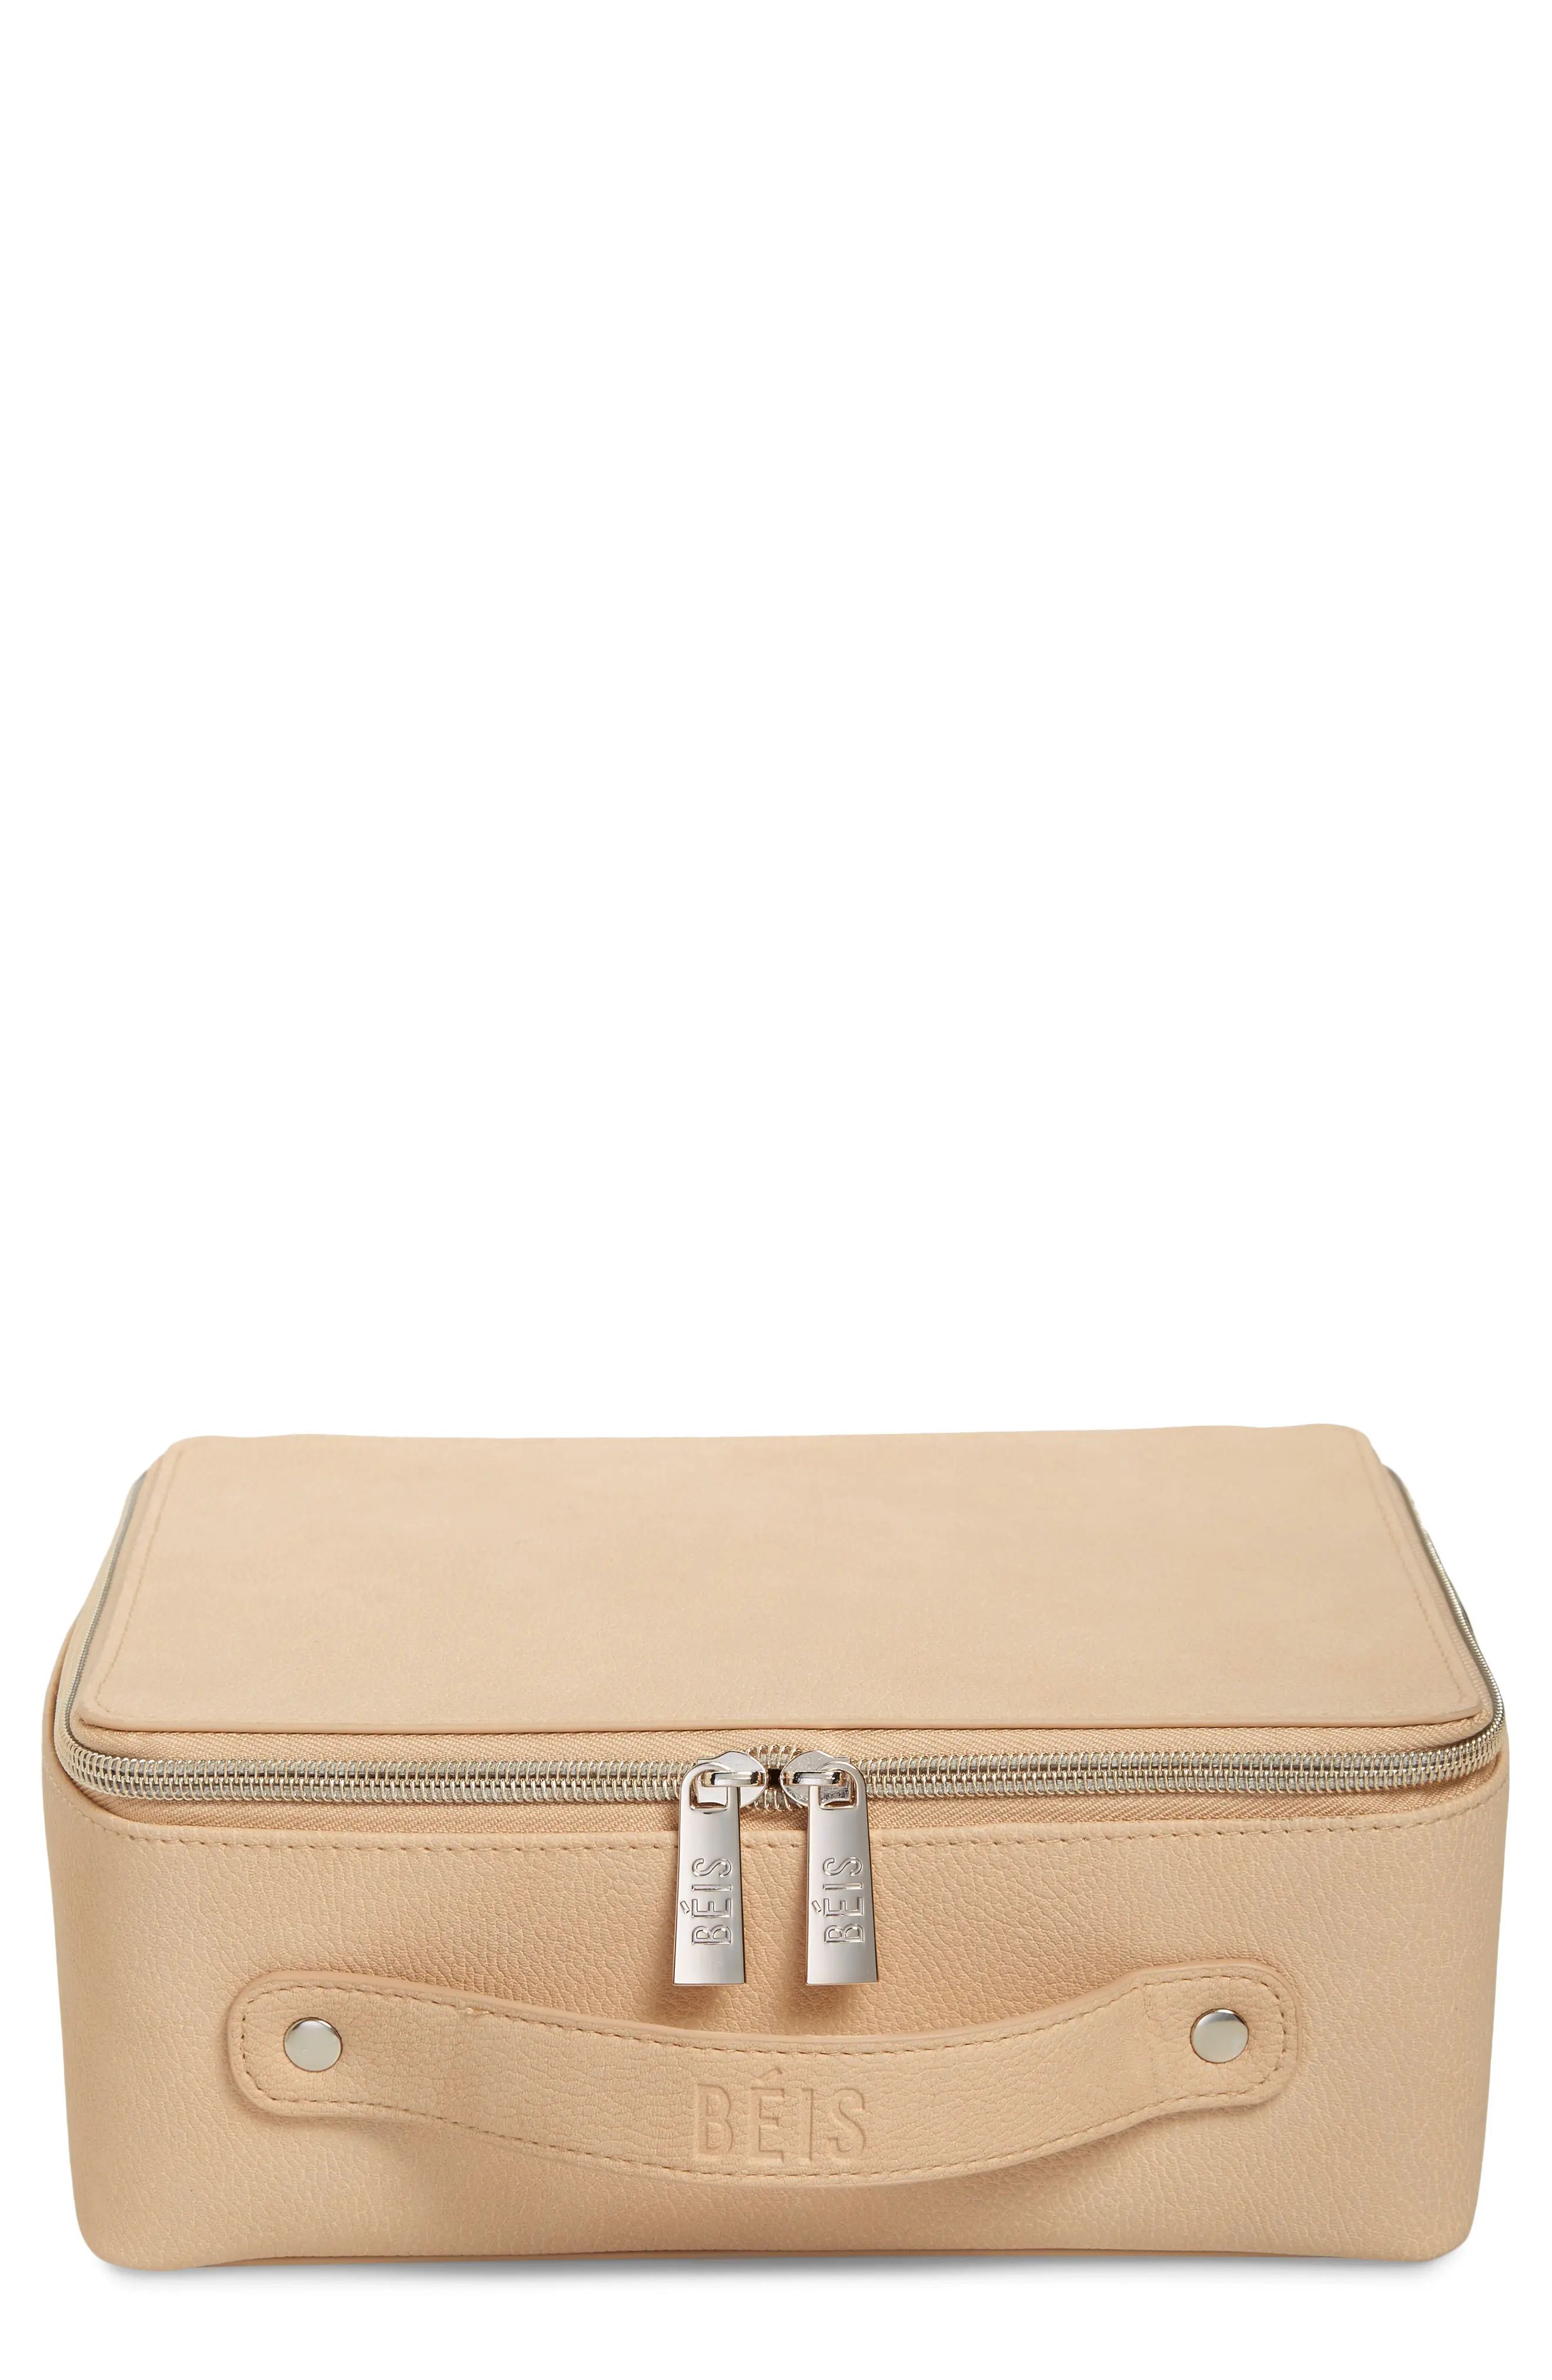 Beis The Cosmetics Case | Nordstrom